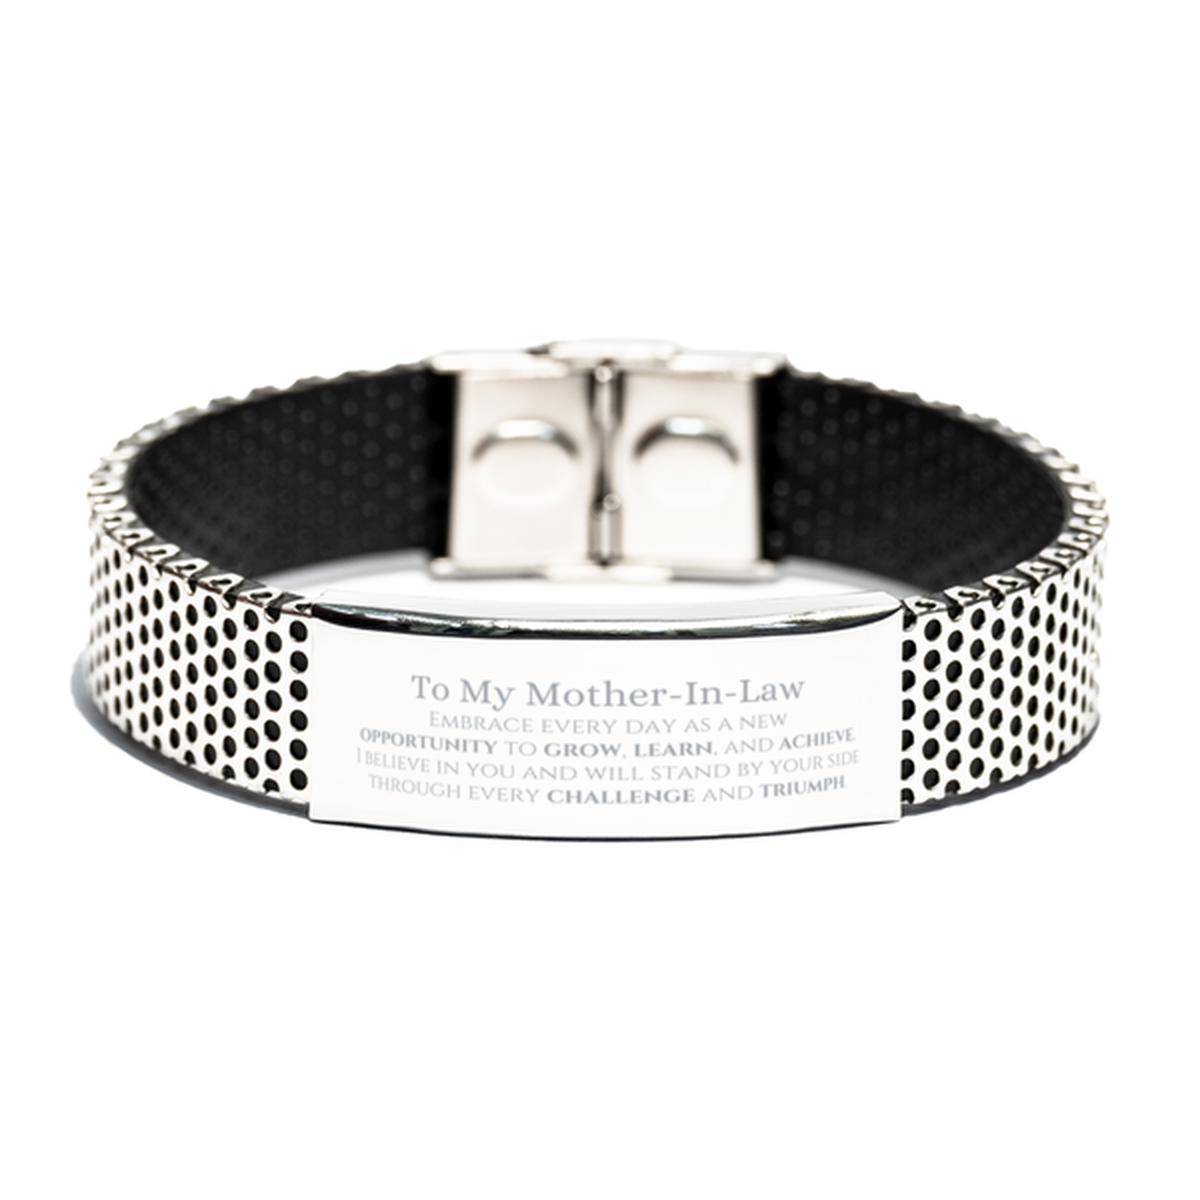 To My Mother-In-Law Gifts, I believe in you and will stand by your side, Inspirational Stainless Steel Bracelet For Mother-In-Law, Birthday Christmas Motivational Mother-In-Law Gifts